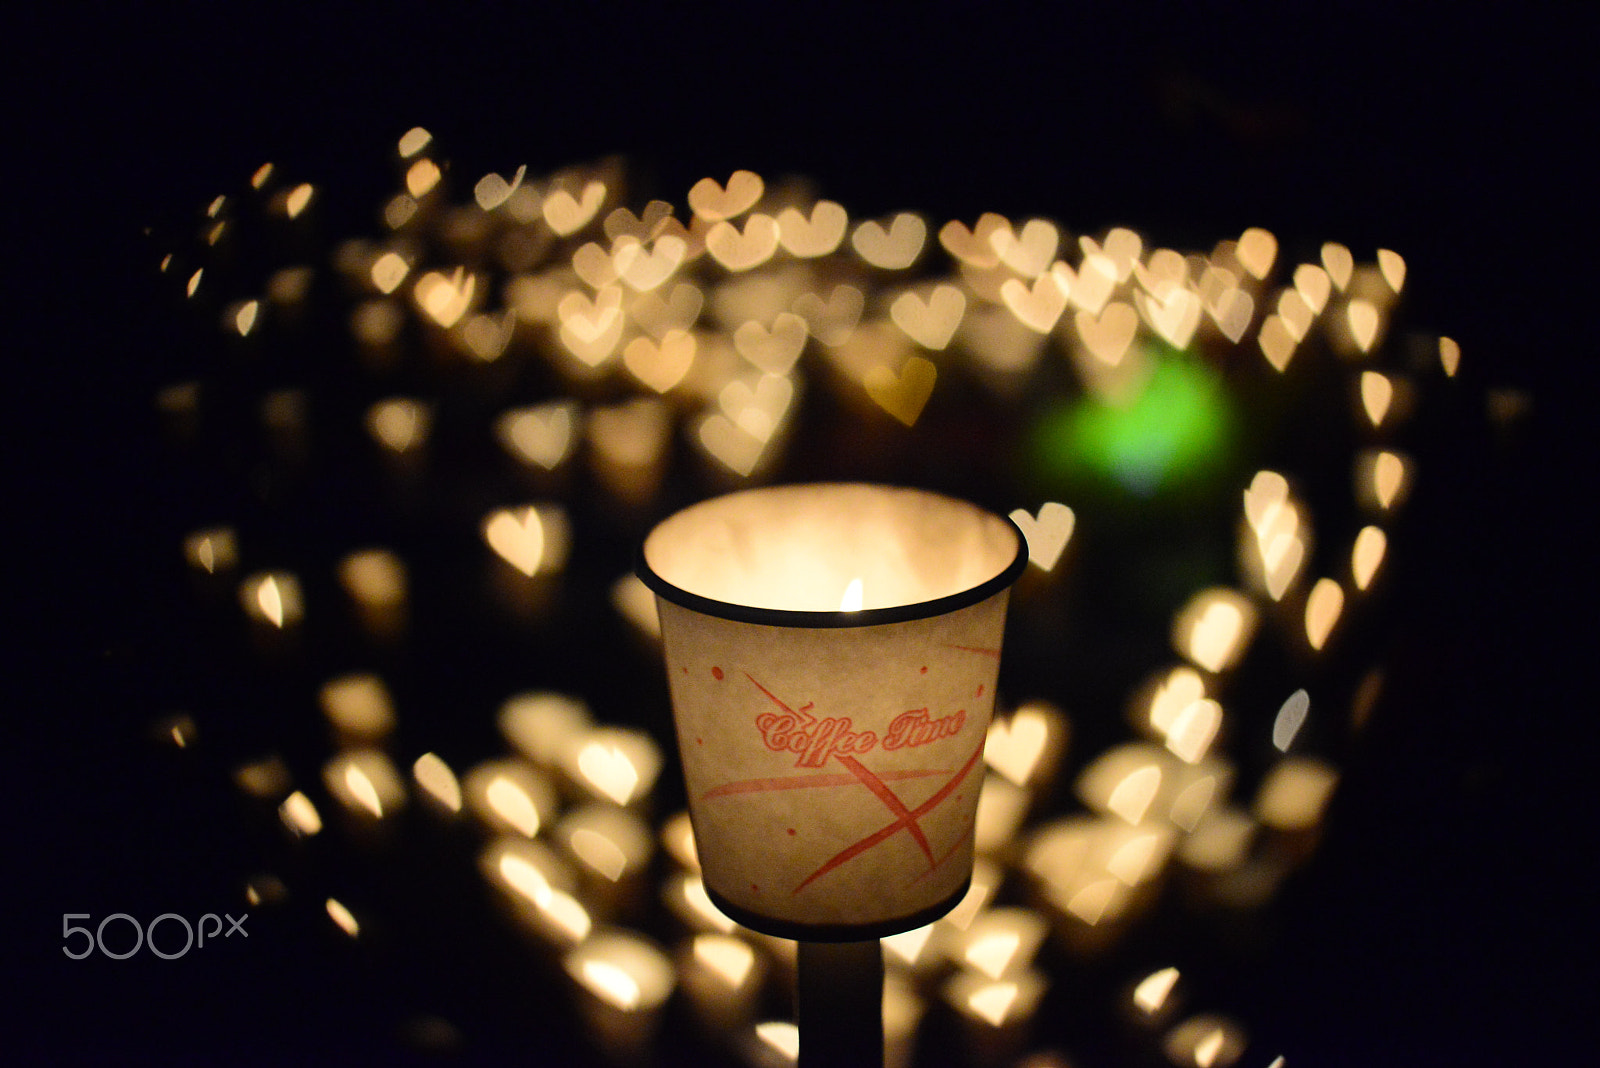 AF Micro-Nikkor 60mm f/2.8 sample photo. Candlelight vigils to be sublimated into love photography